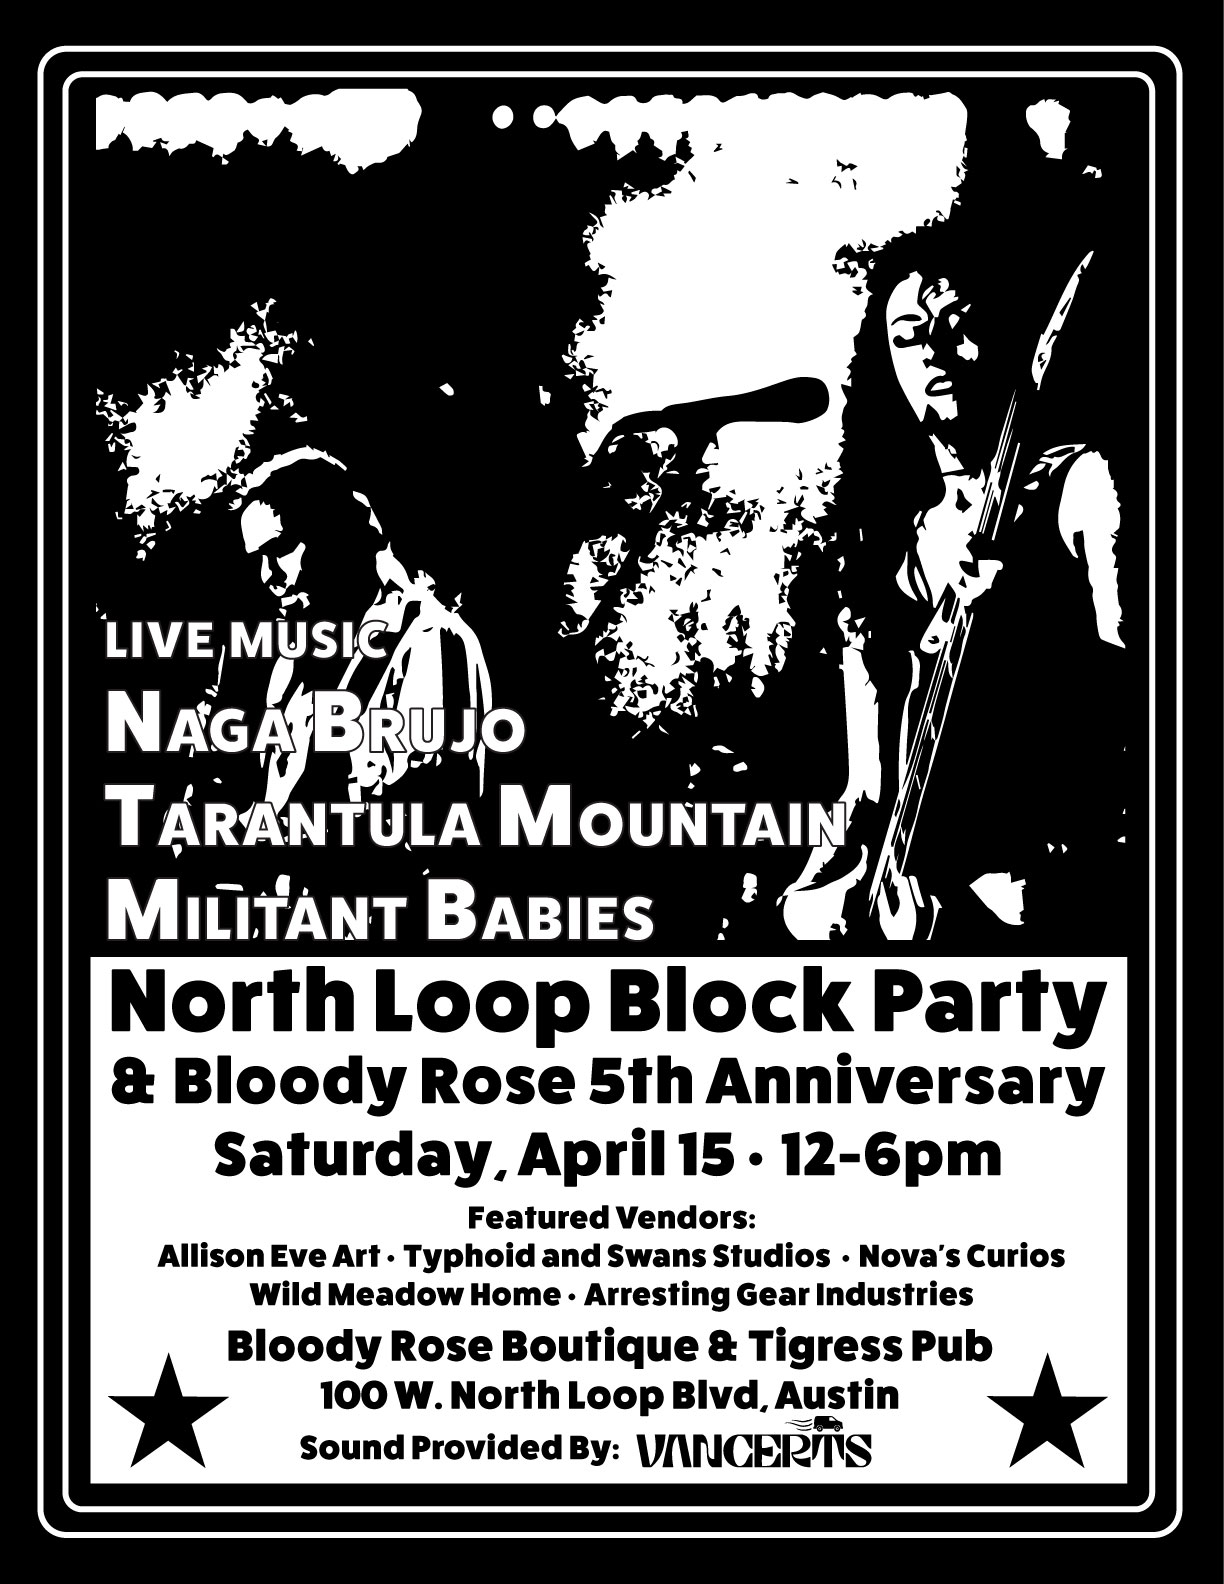 North Loop Block Party & Bloody Rose 5th Anniversary